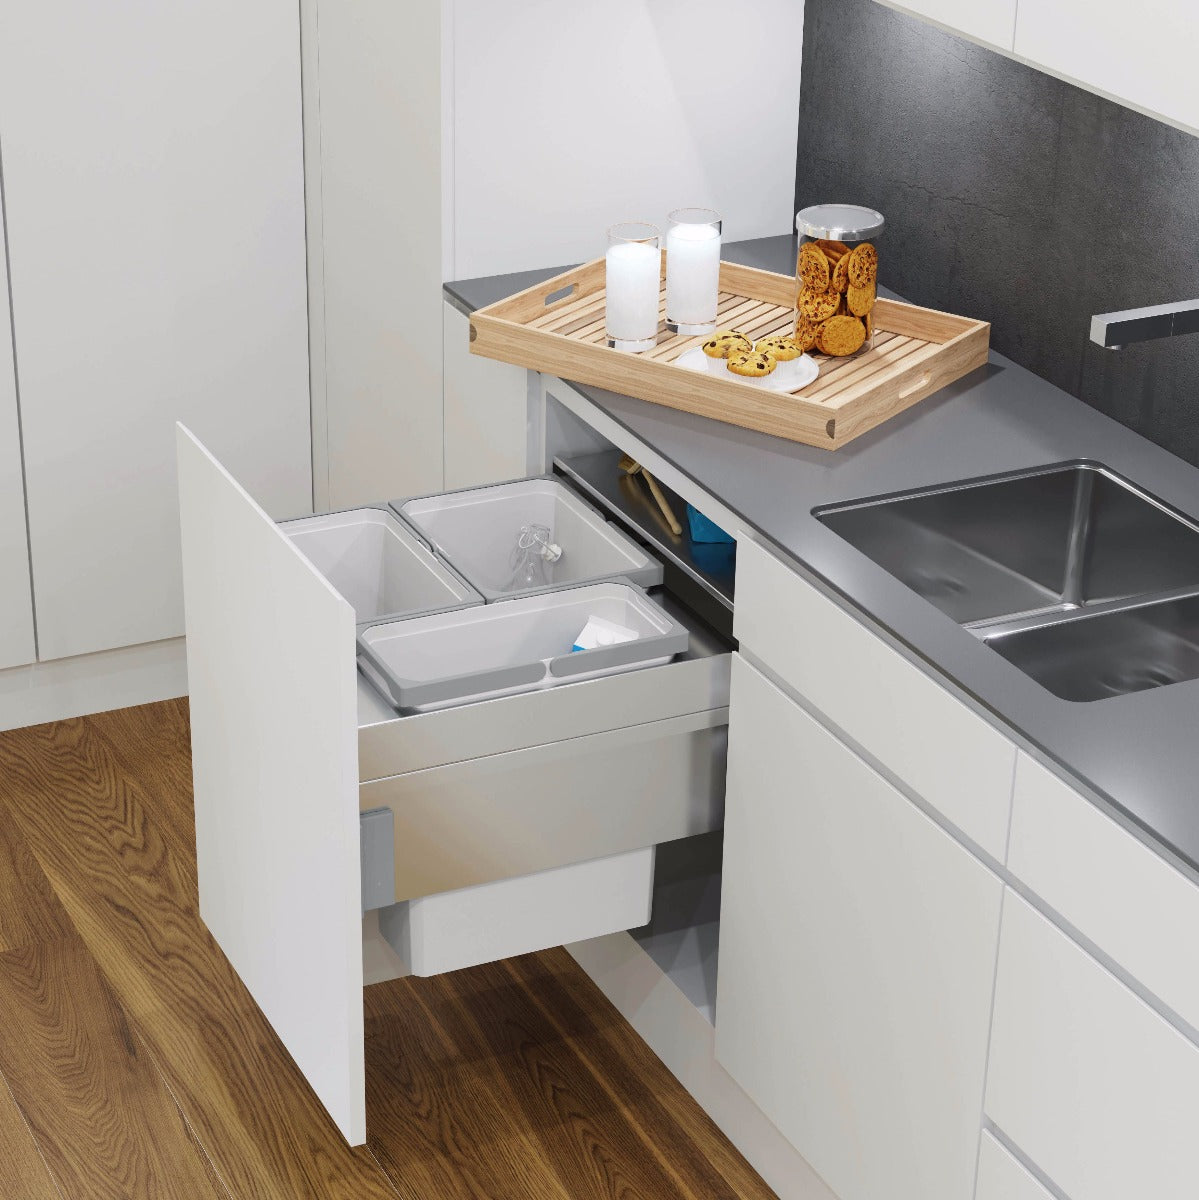 A silver grey Vauth-Sagel integrated kitchen bin with three compartments for separating waste and recycling.